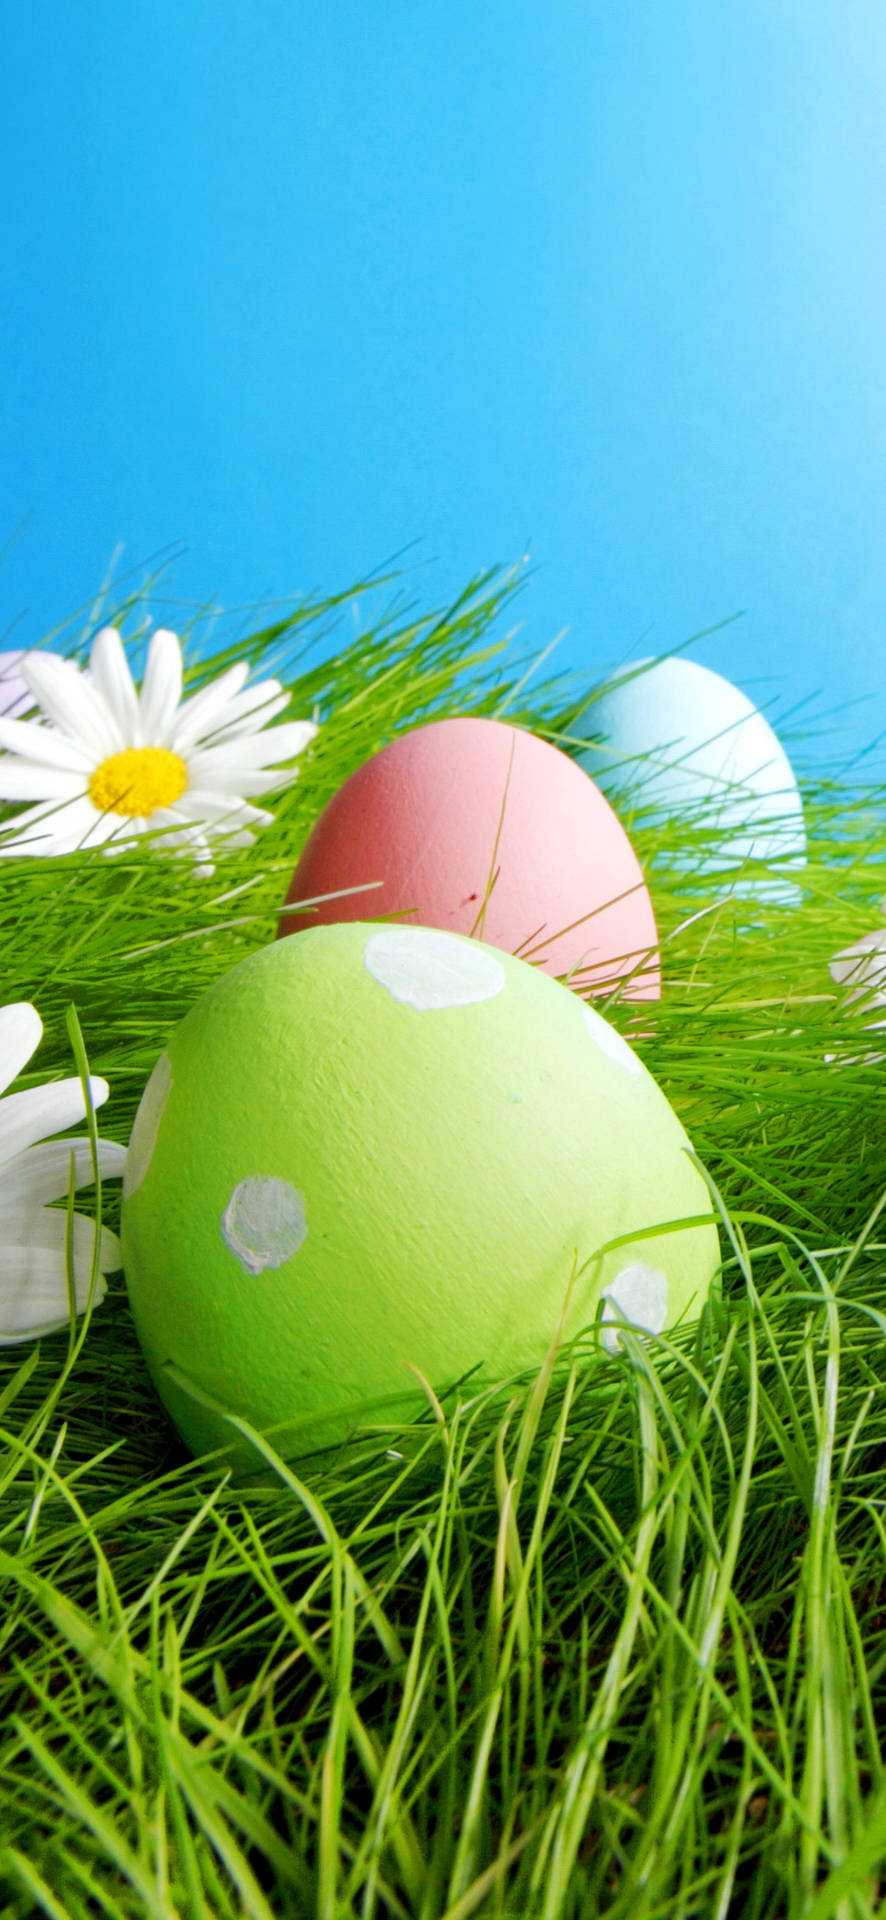 Celebrate Easter in Style with an Easter Phone Wallpaper